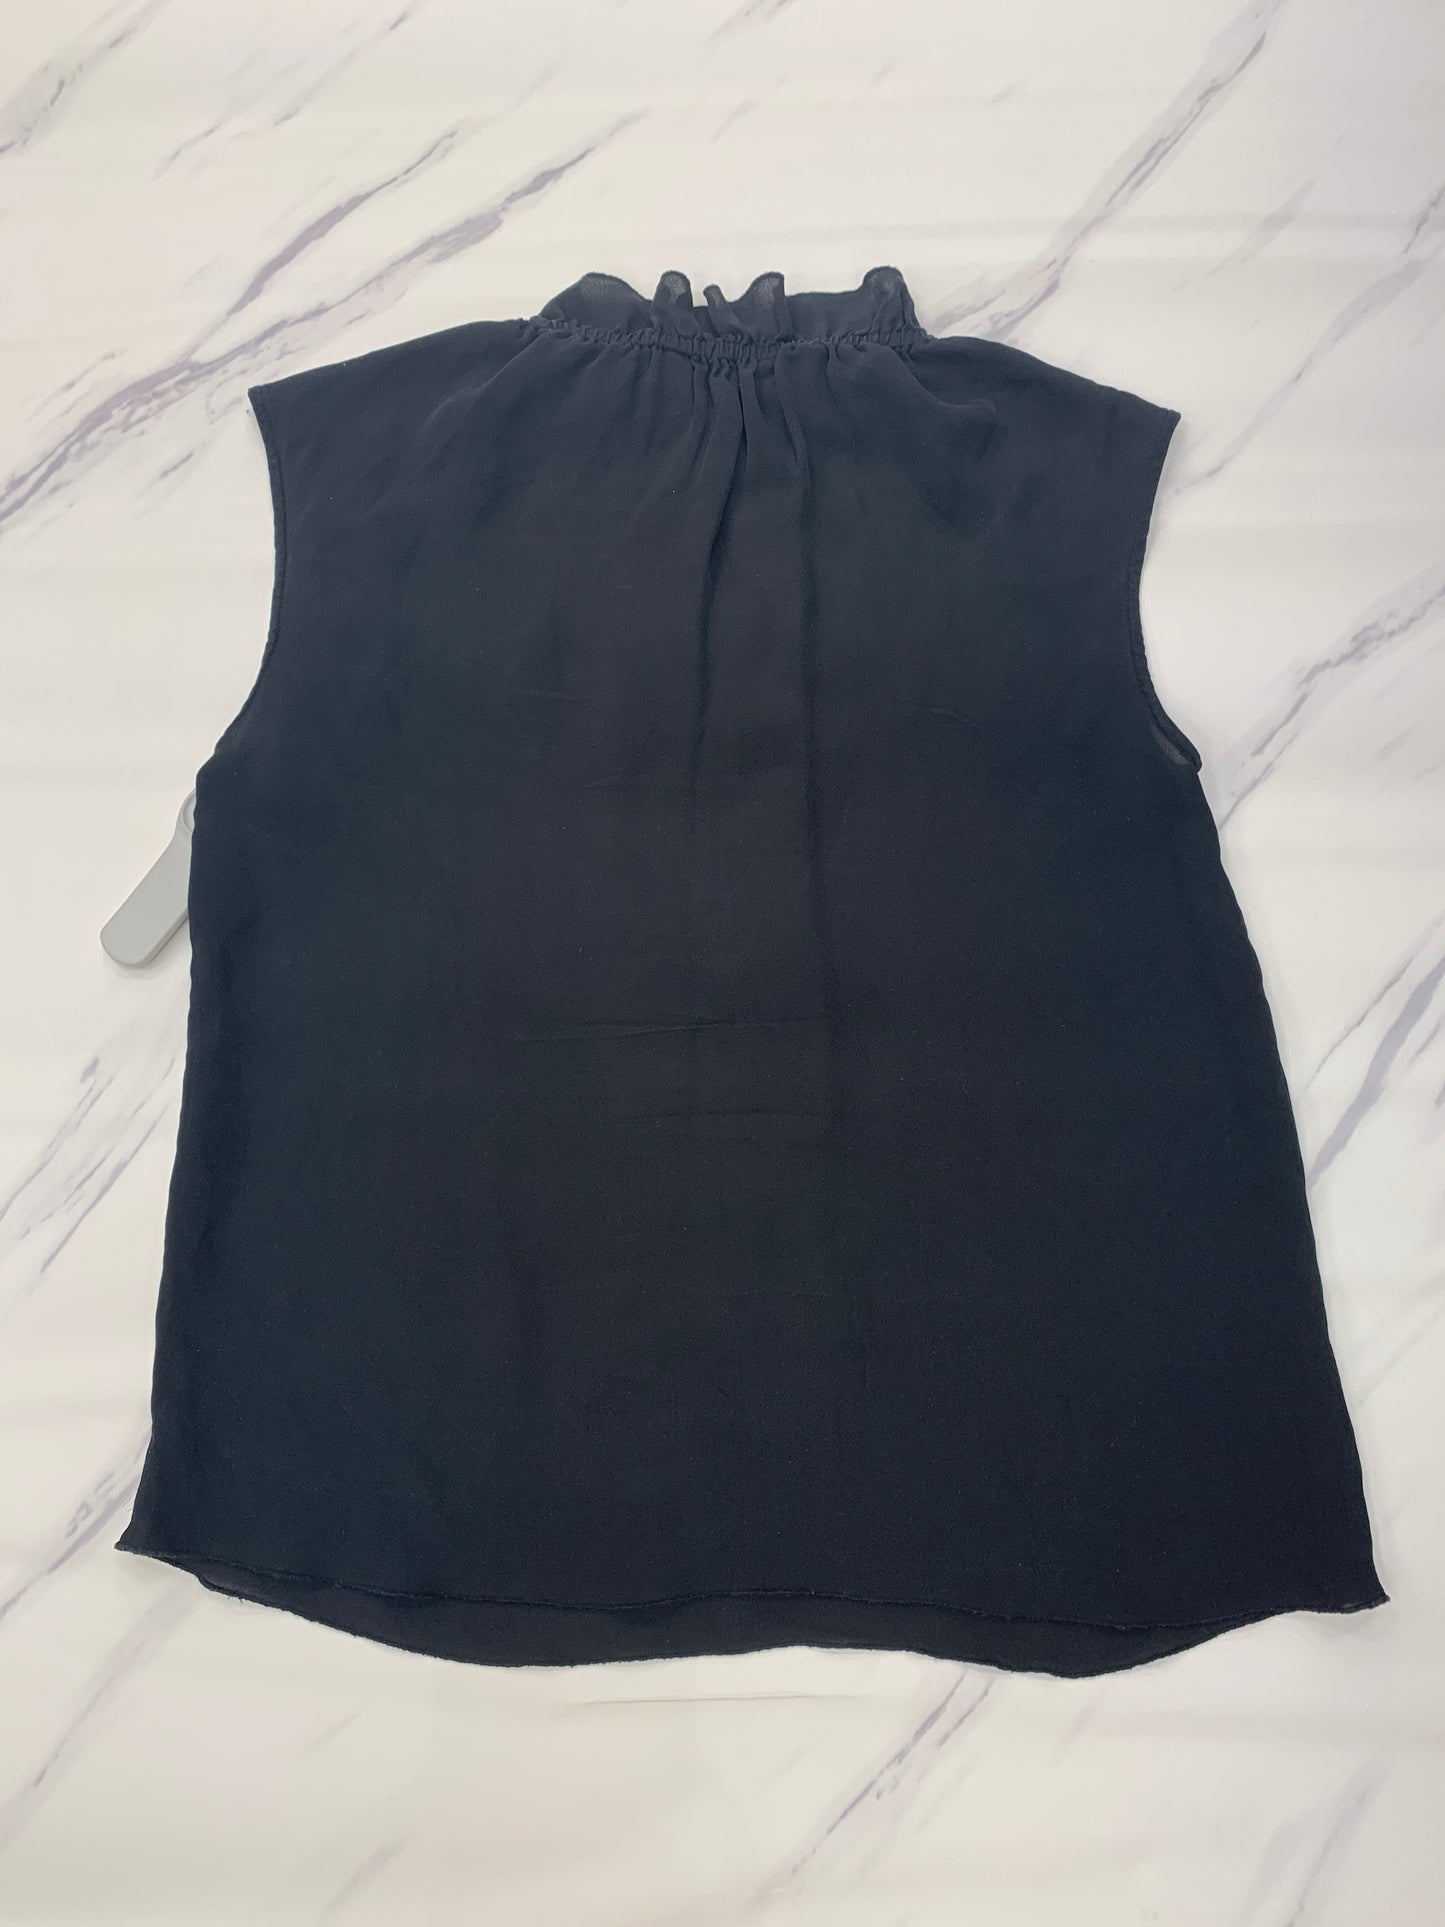 Top Sleeveless By Rebecca Taylor  Size: S